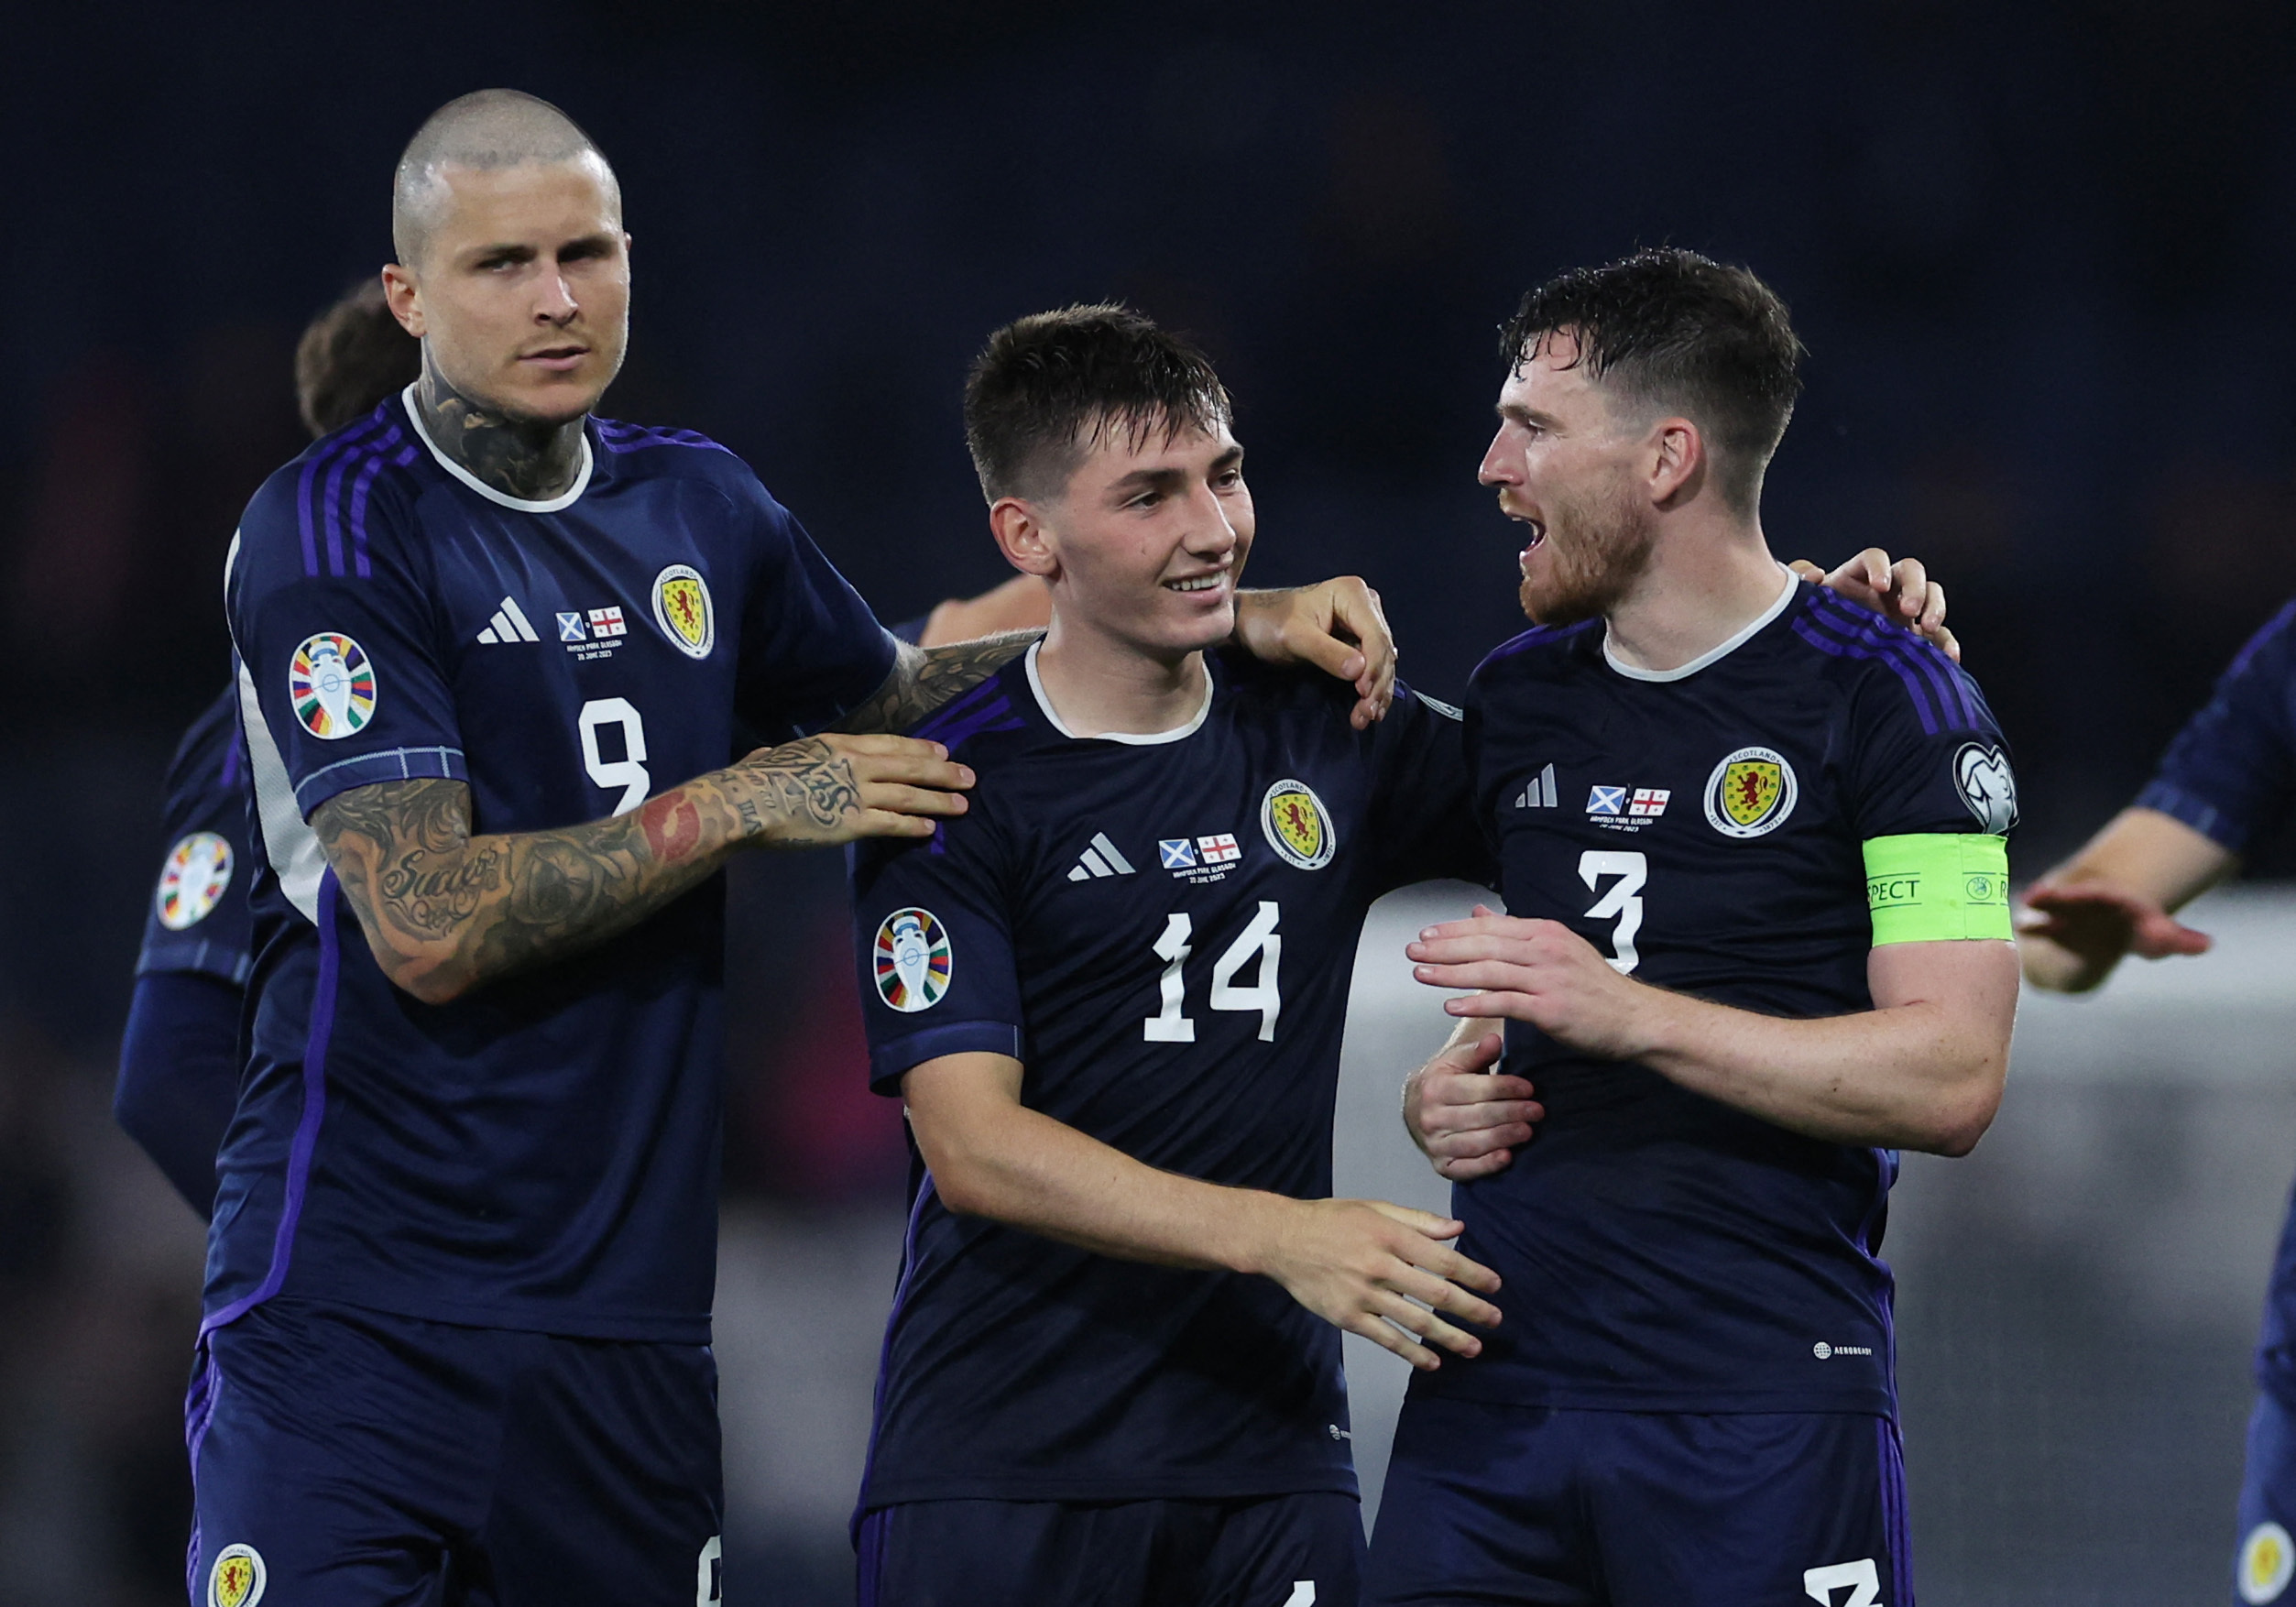 Scotland beat in match suspended for over an hour after